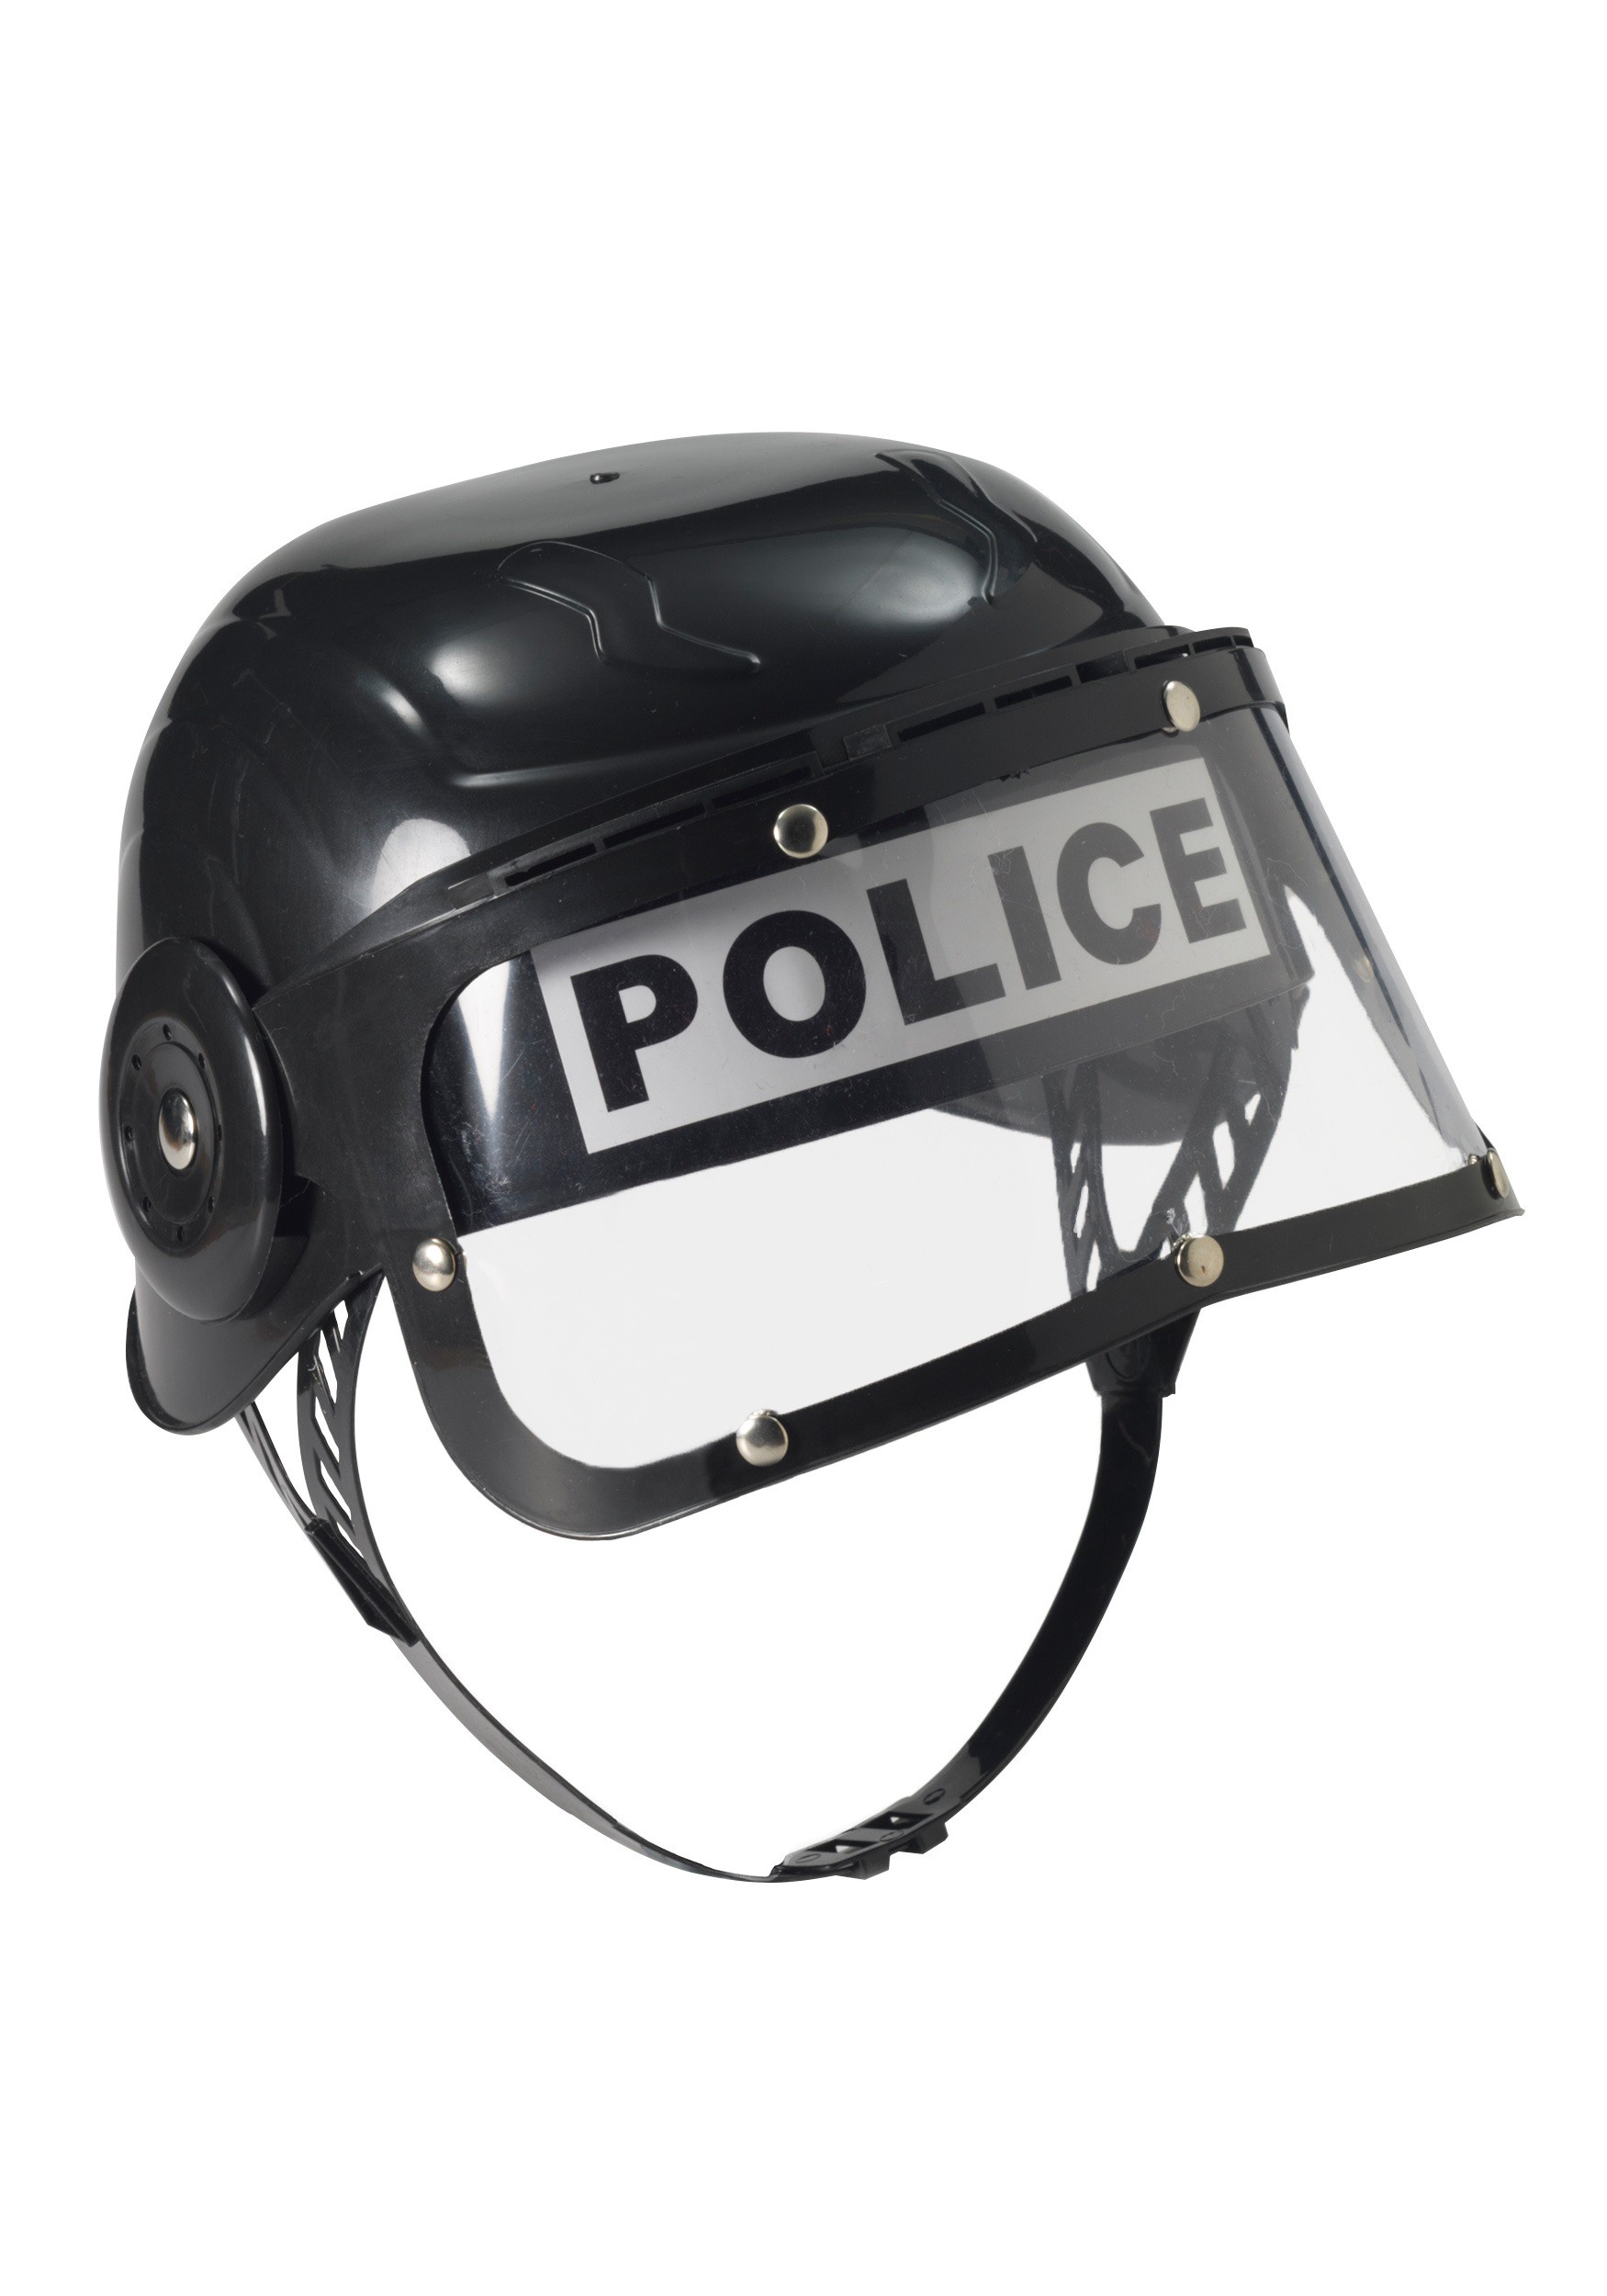 Policeman hat toy photo